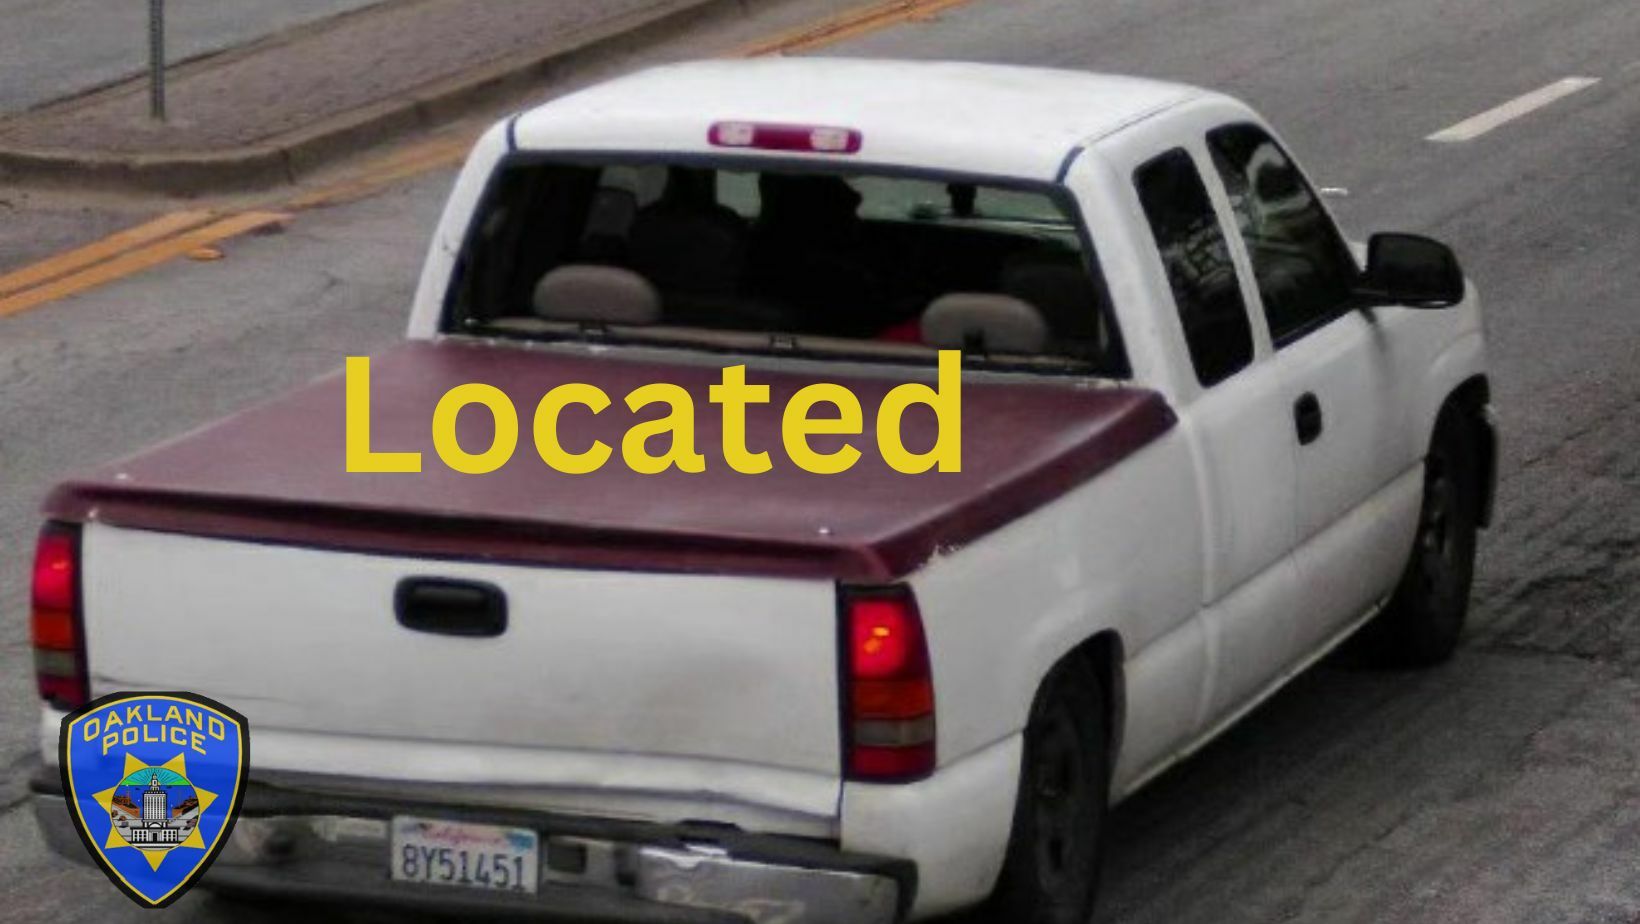 Photo of a white Chevy Pickup Truck, with a red cover on the bed.  California license plate 8Y51451 which has been located